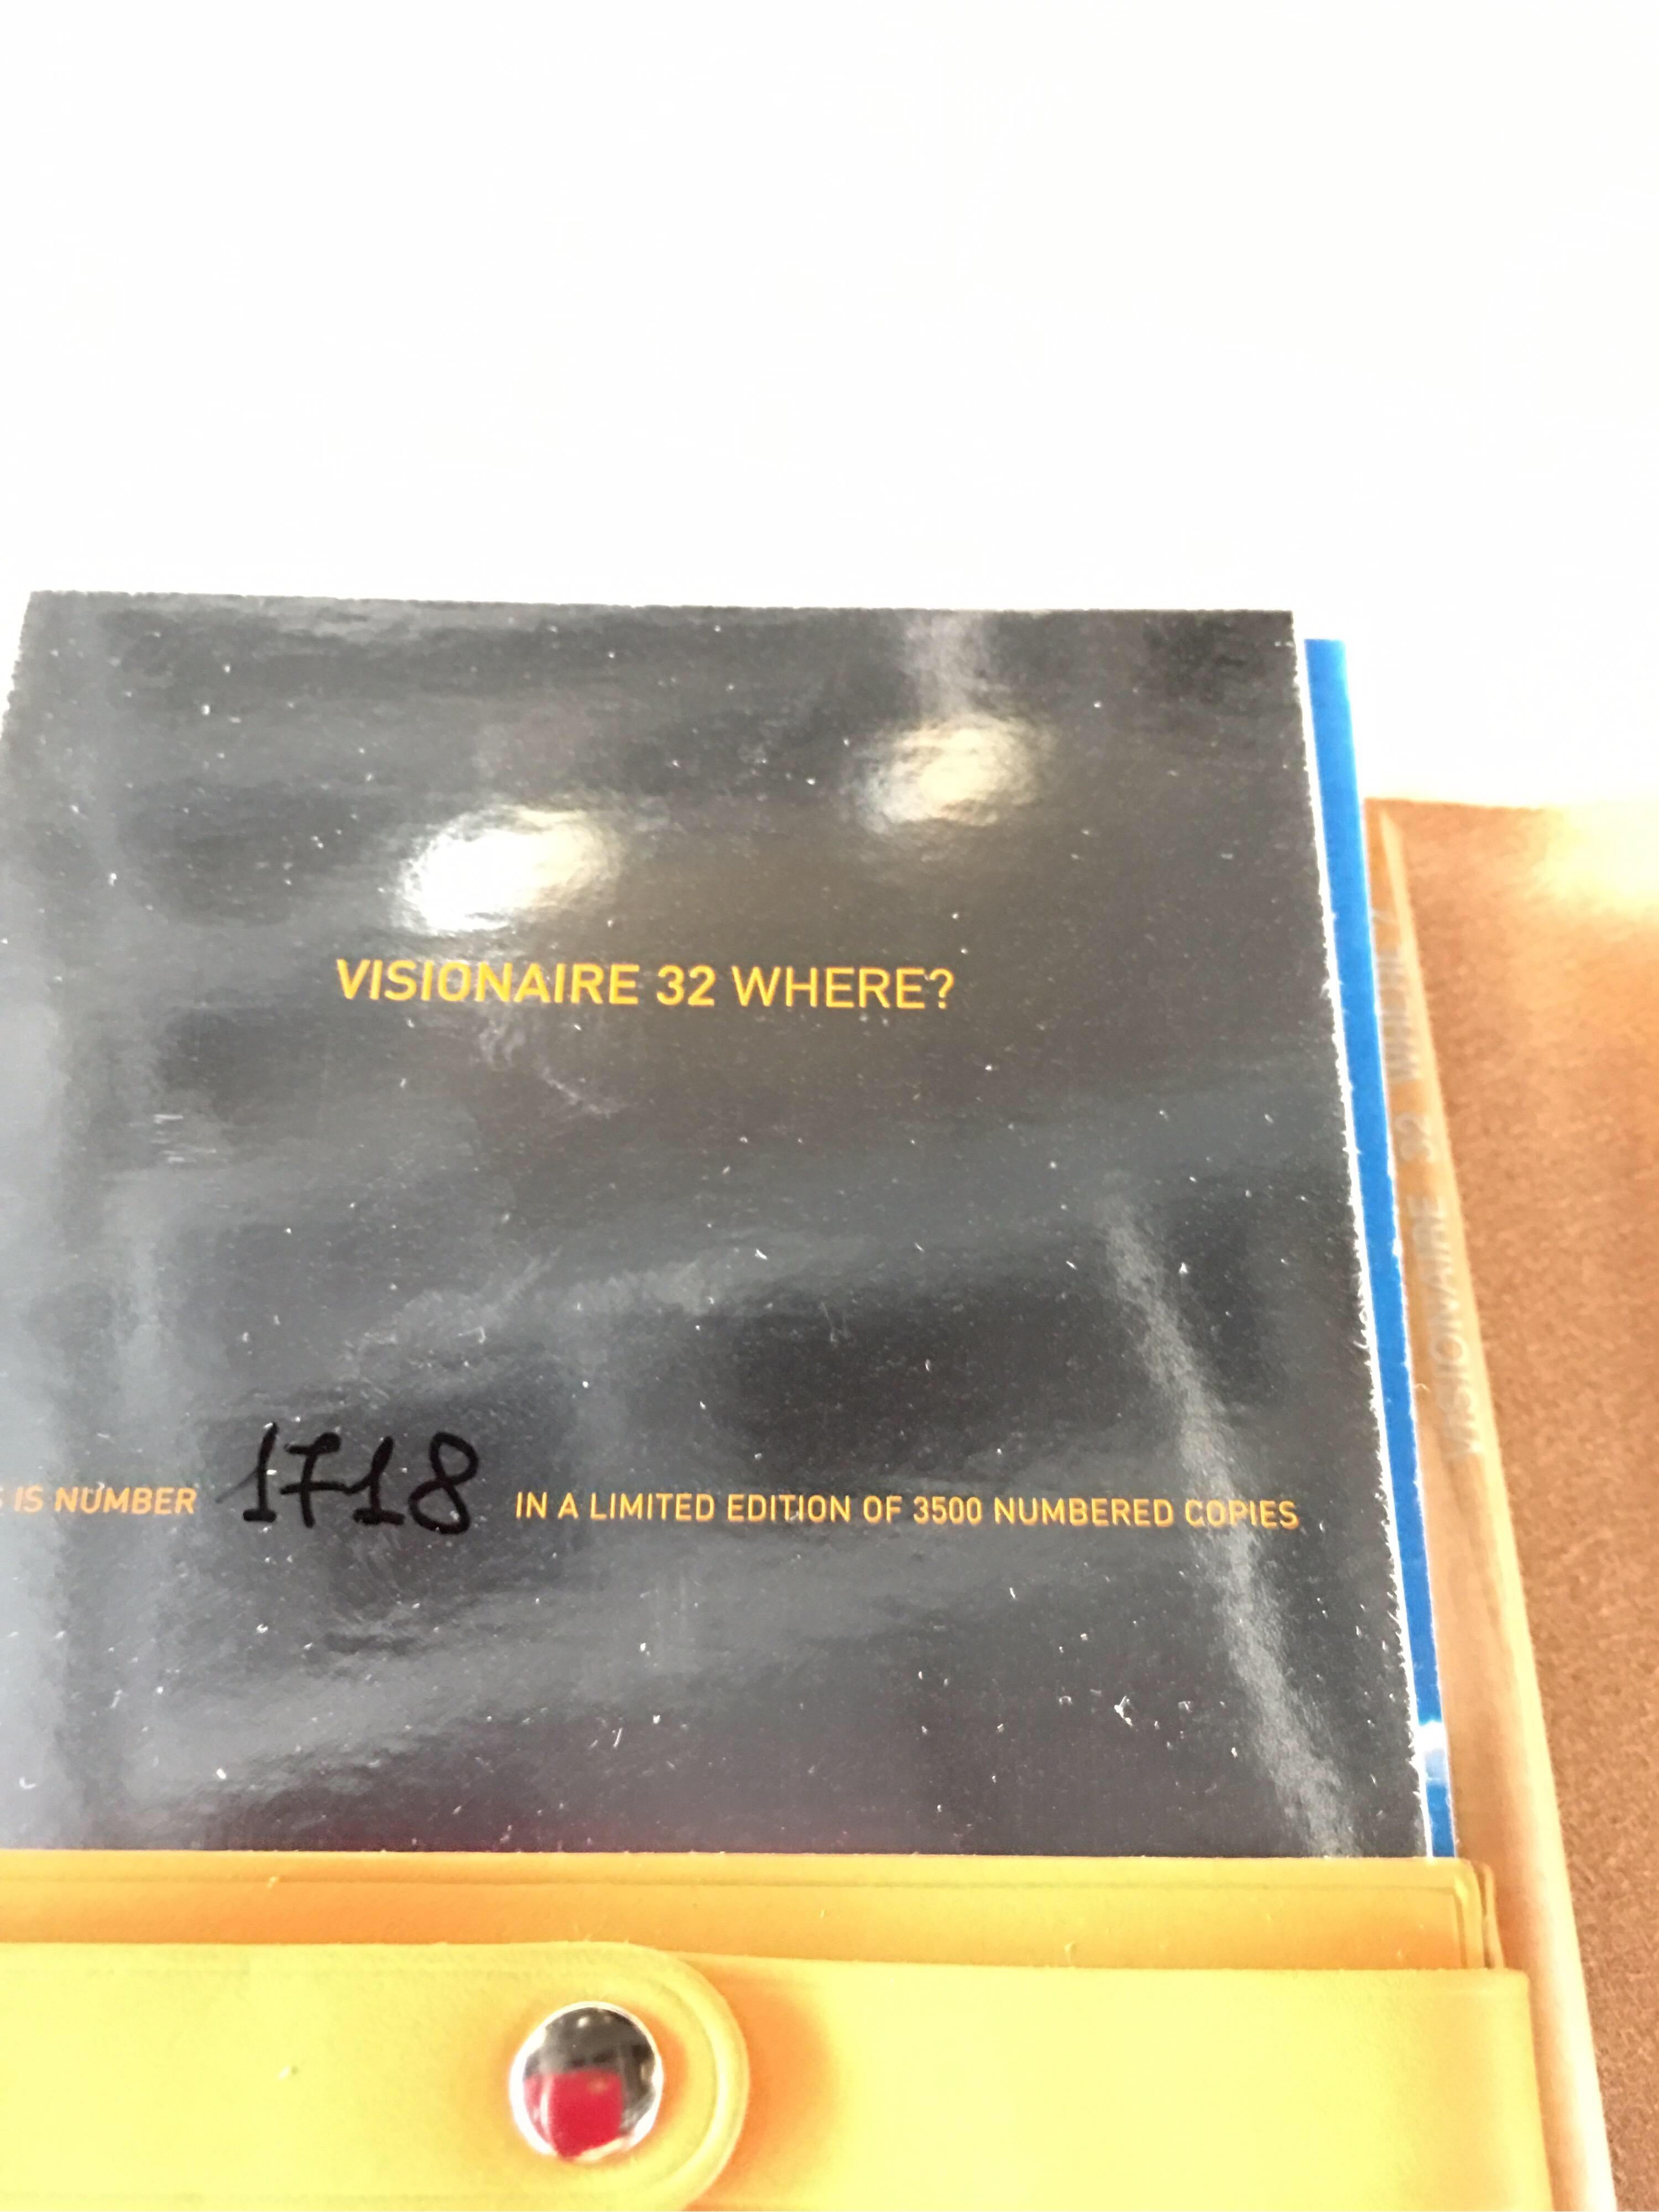 French Hermes Visionaire Number 32 “Where?” Limited Edition